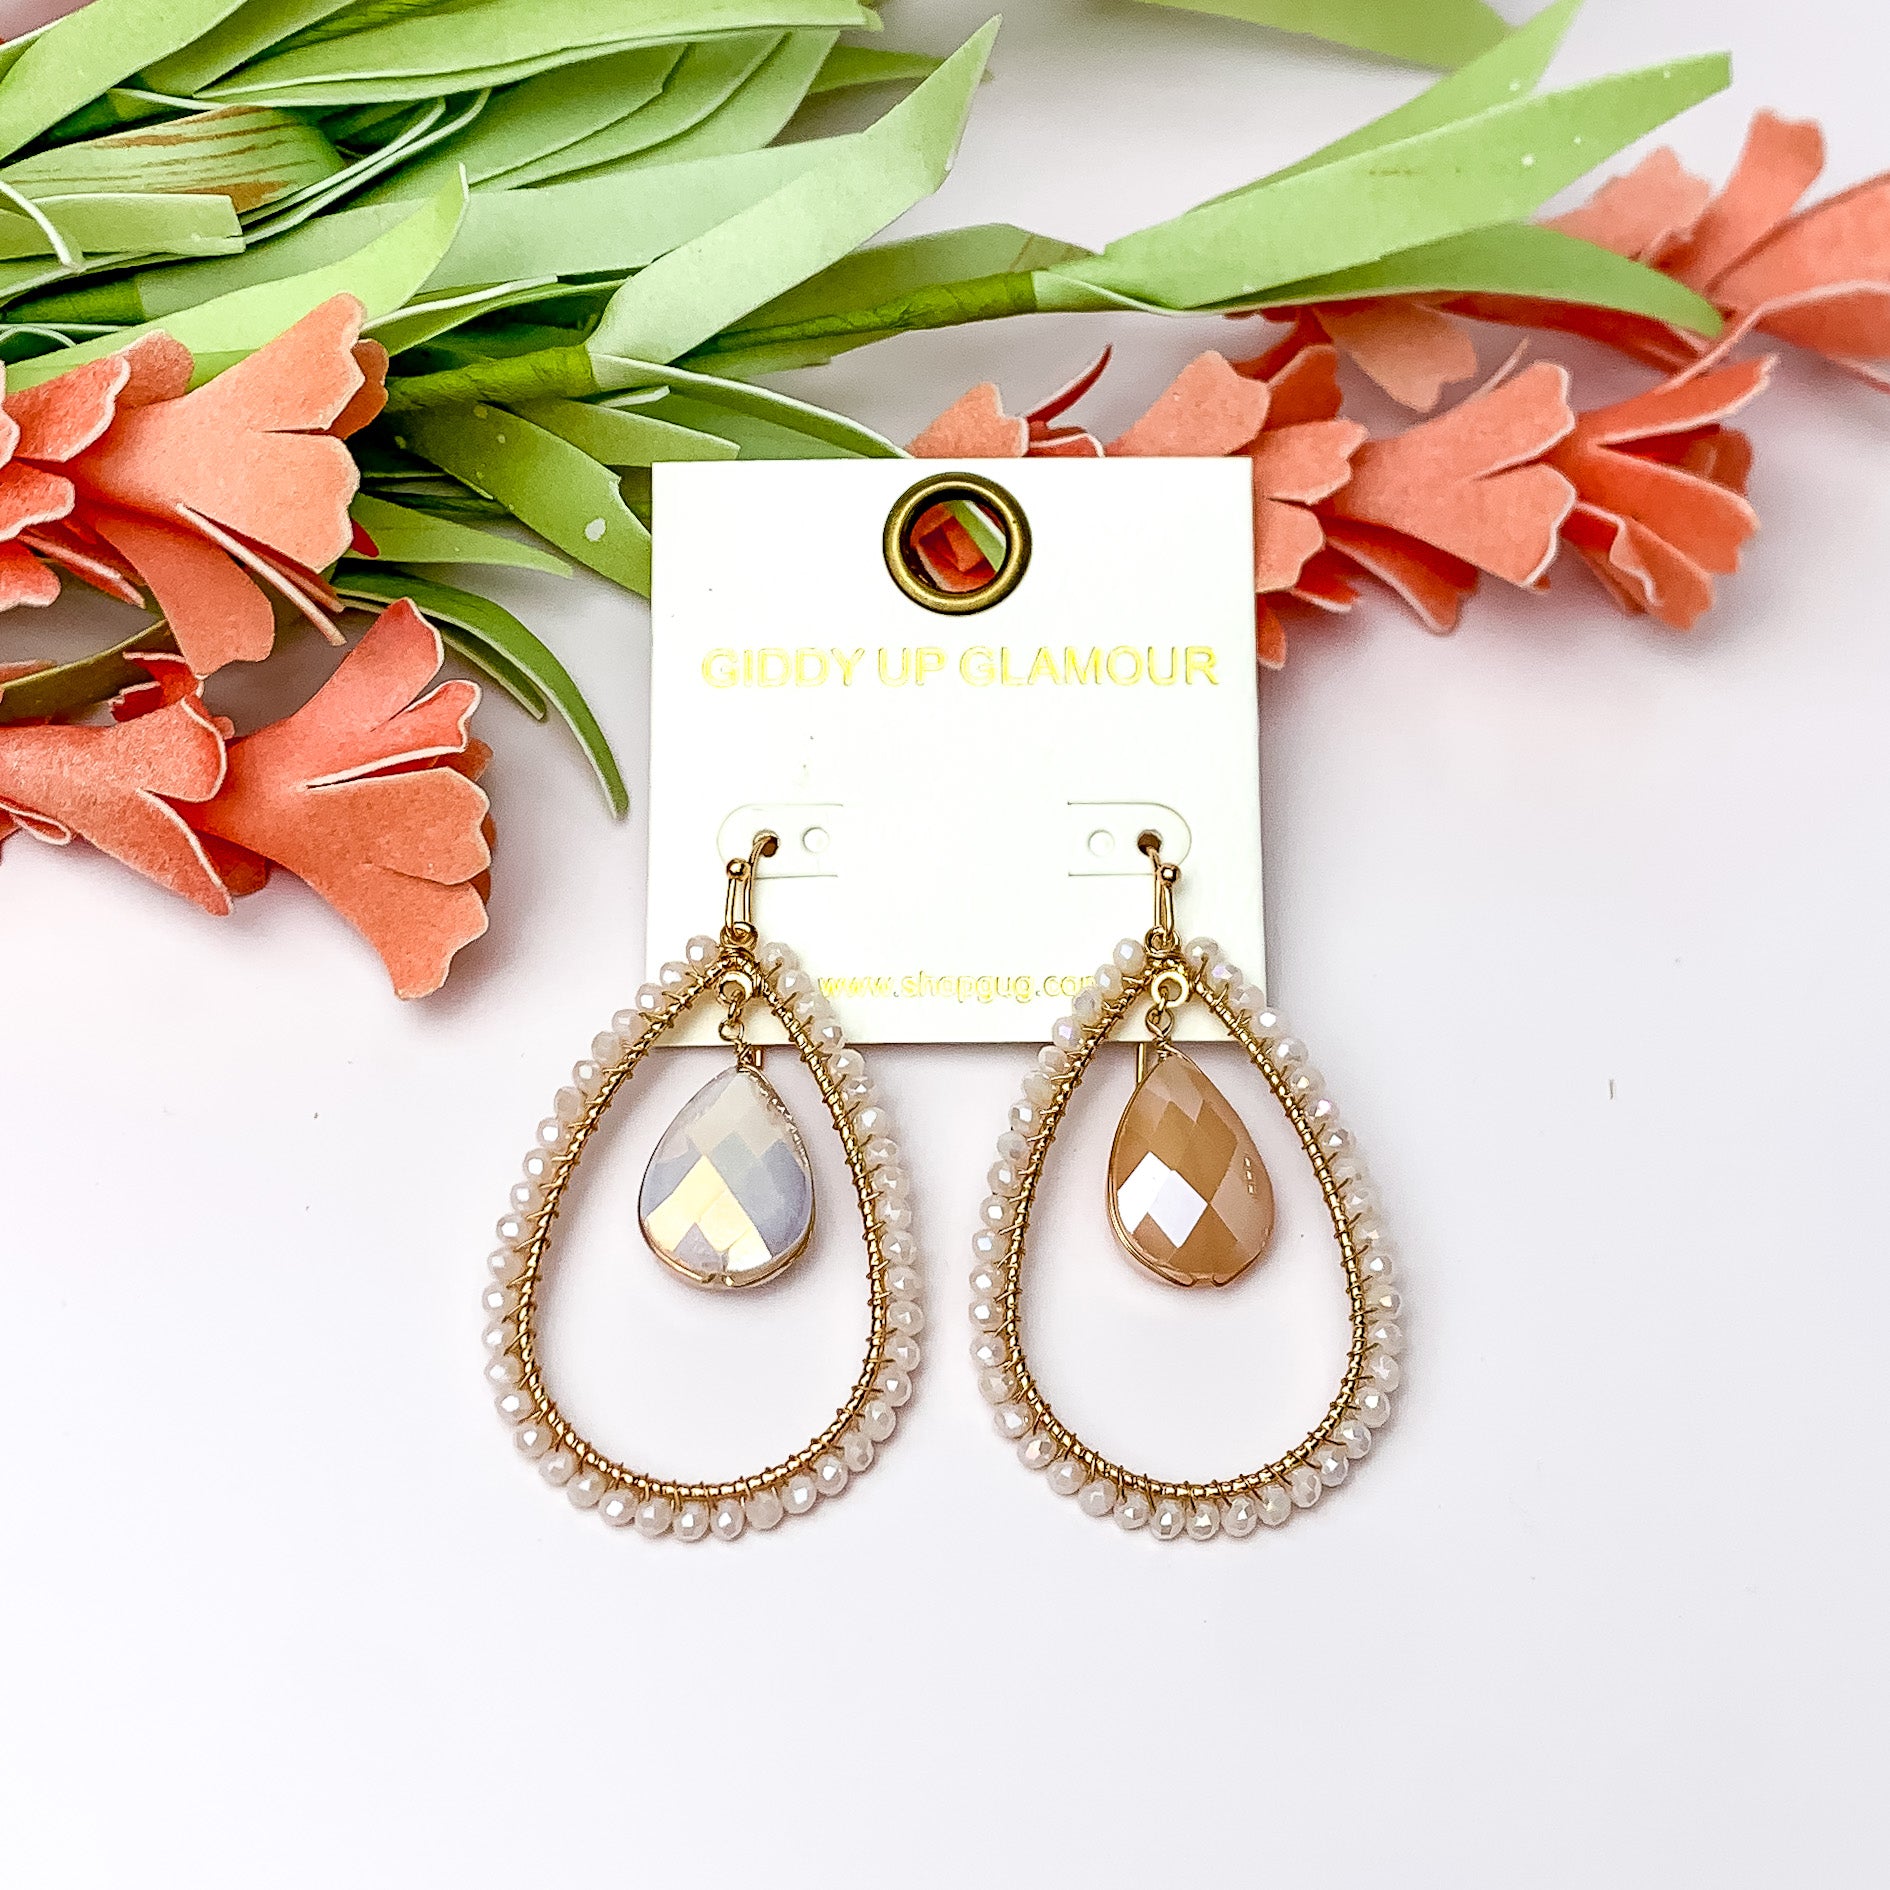 Ivory Stone Inside Open Beaded Teardrop Earrings with Gold Tone Outline. Pictured on a white background with flowers at the top.